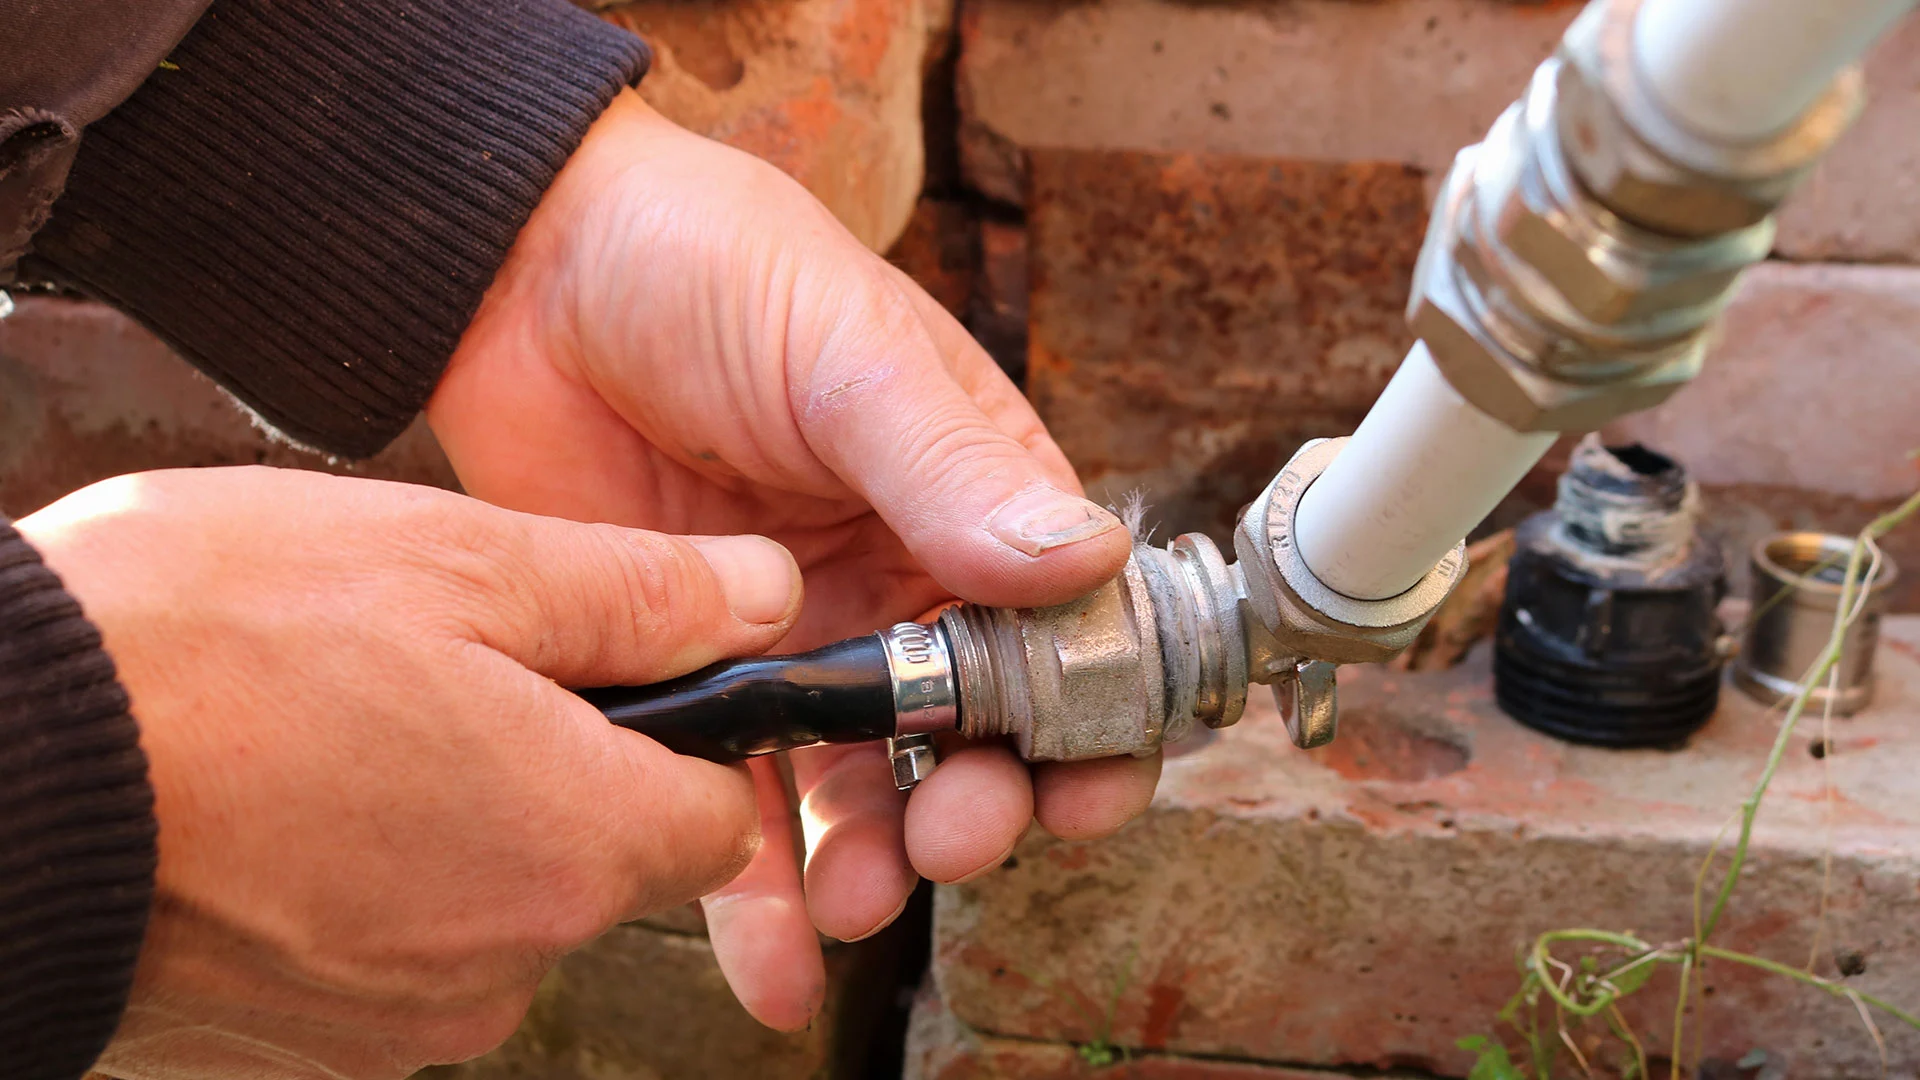 Fairview, TX irrigation repair expert is replacing a broken pipe and valve.